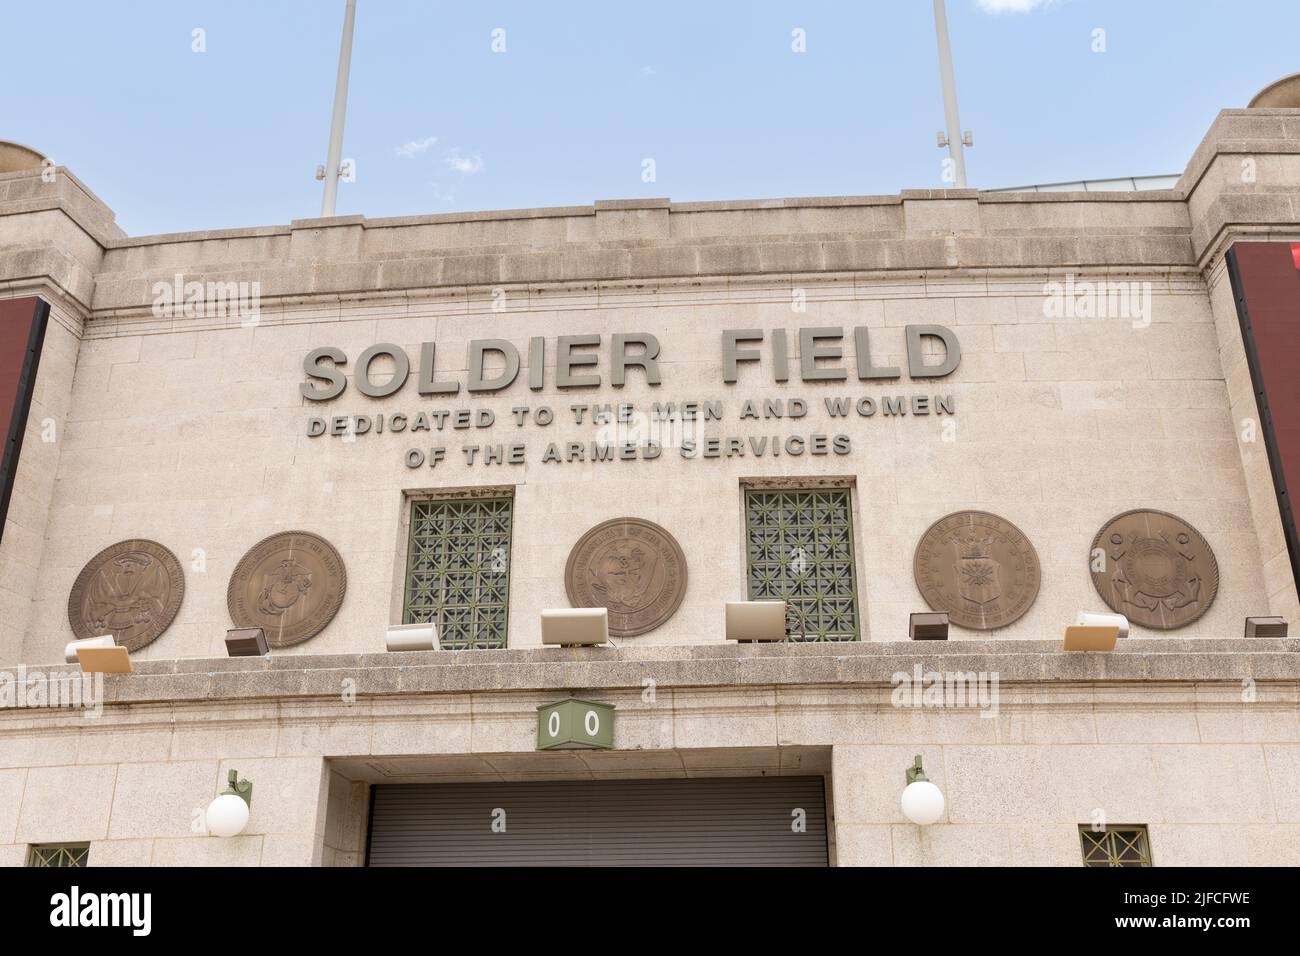 Soldier Field is home to the Chicago Bears and owned by the Chicago Park District. The stadium can hold 61,500 people for sports, concerts, and others. Stock Photo